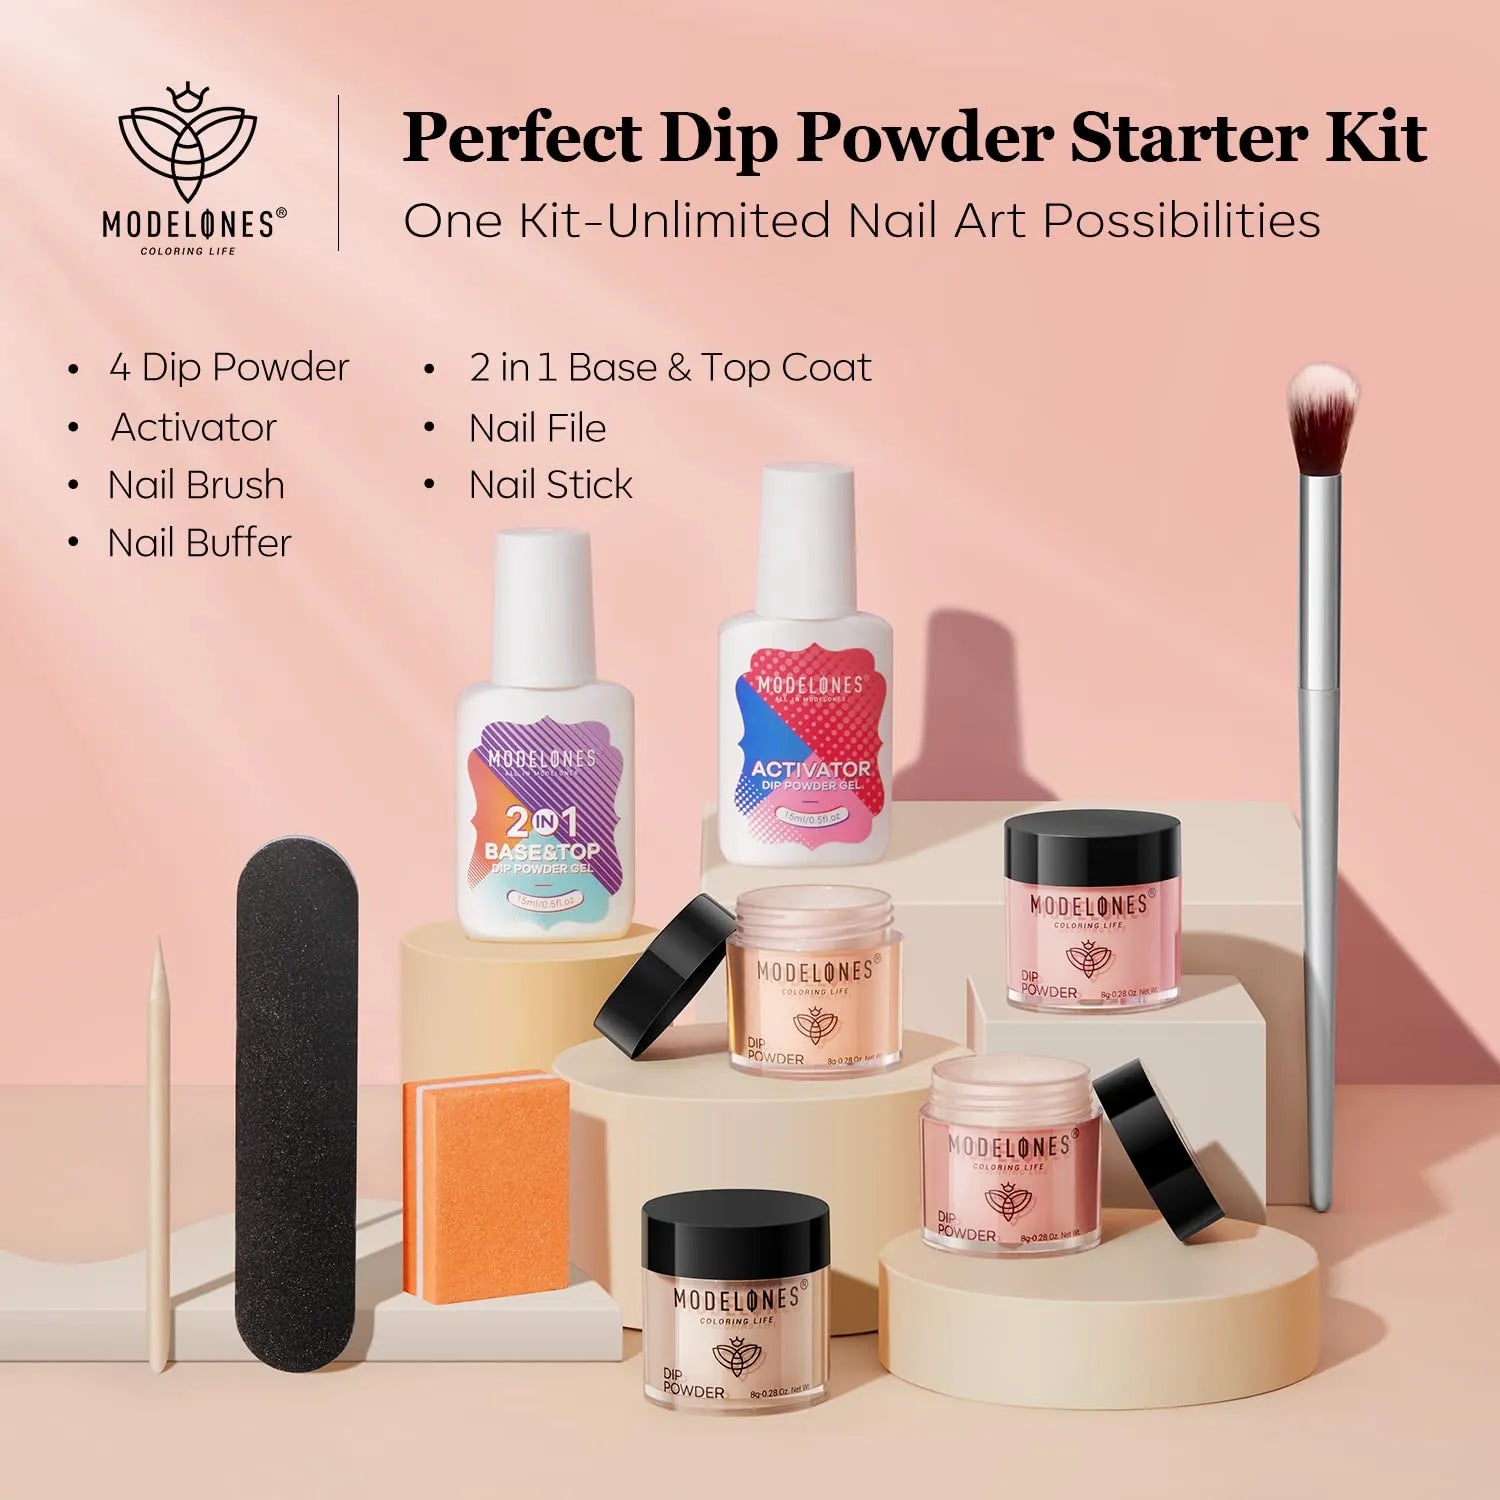 Tender Angel - 10Pcs Dipping Powder All-In-One Kit